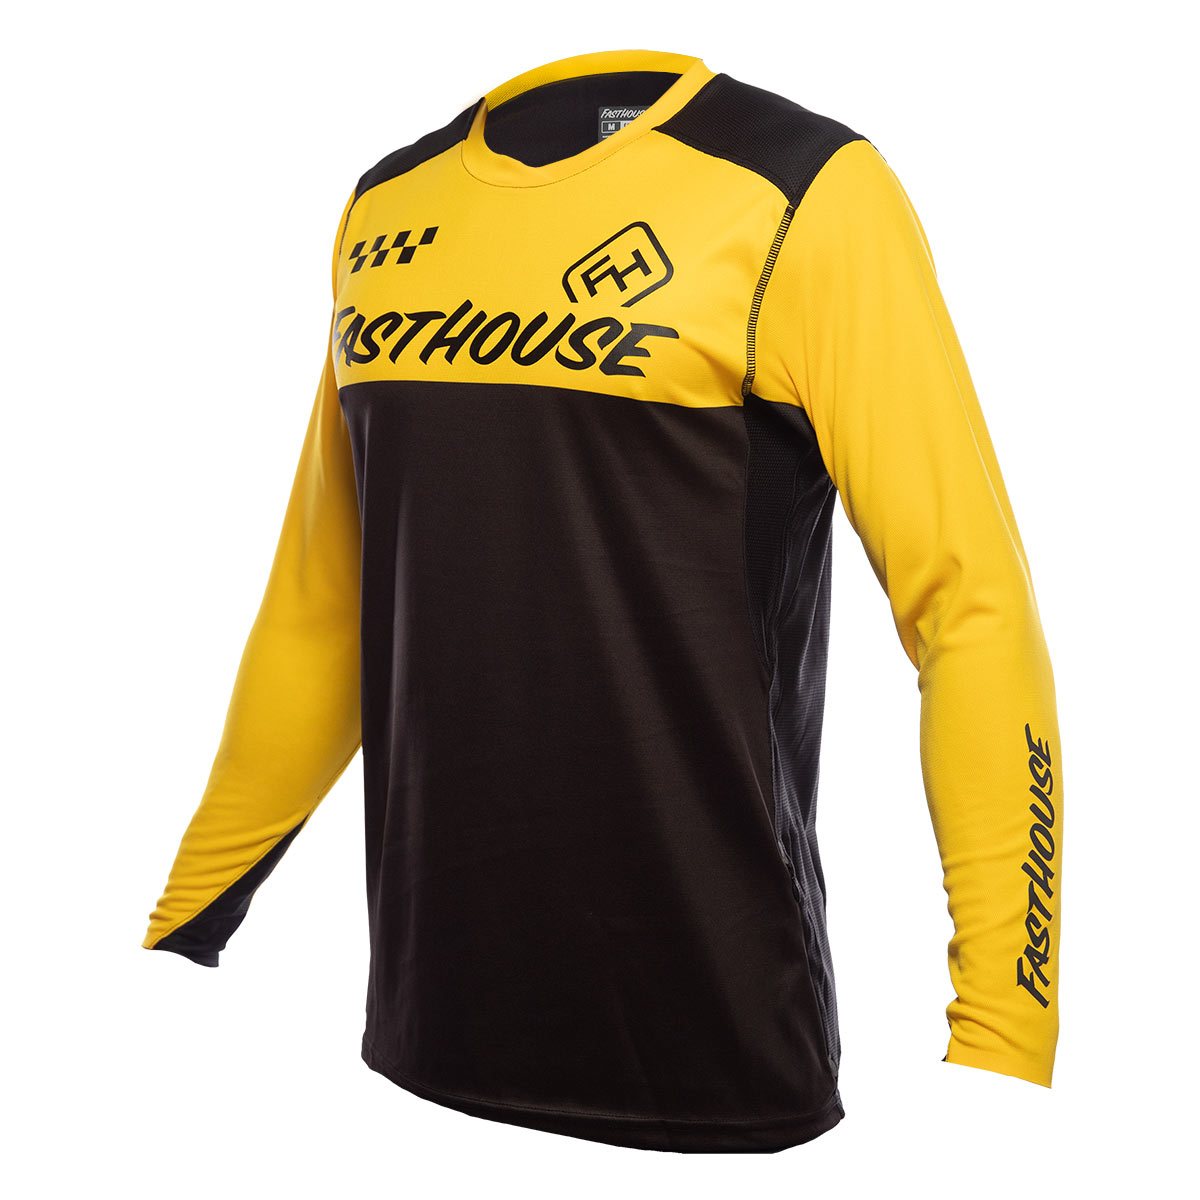 Fasthouse - Alloy Block LS Jersey - Yellow/Black